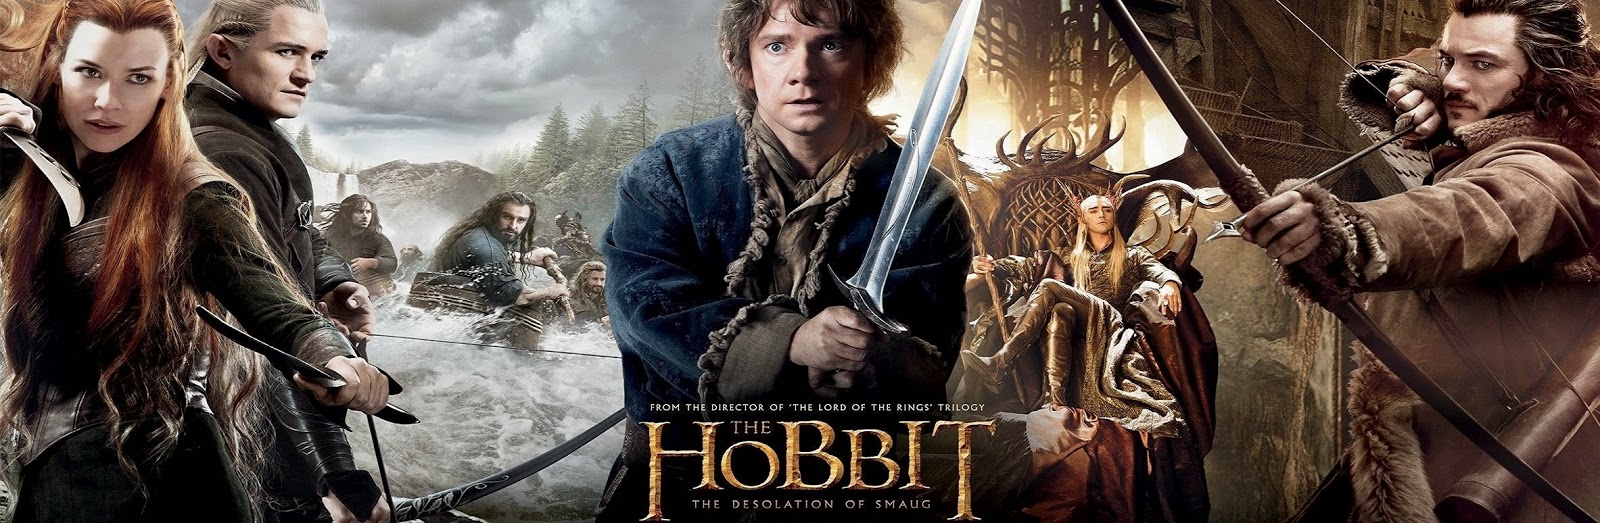 the hobbit an unexpected journey movie download in hindi filmyzilla